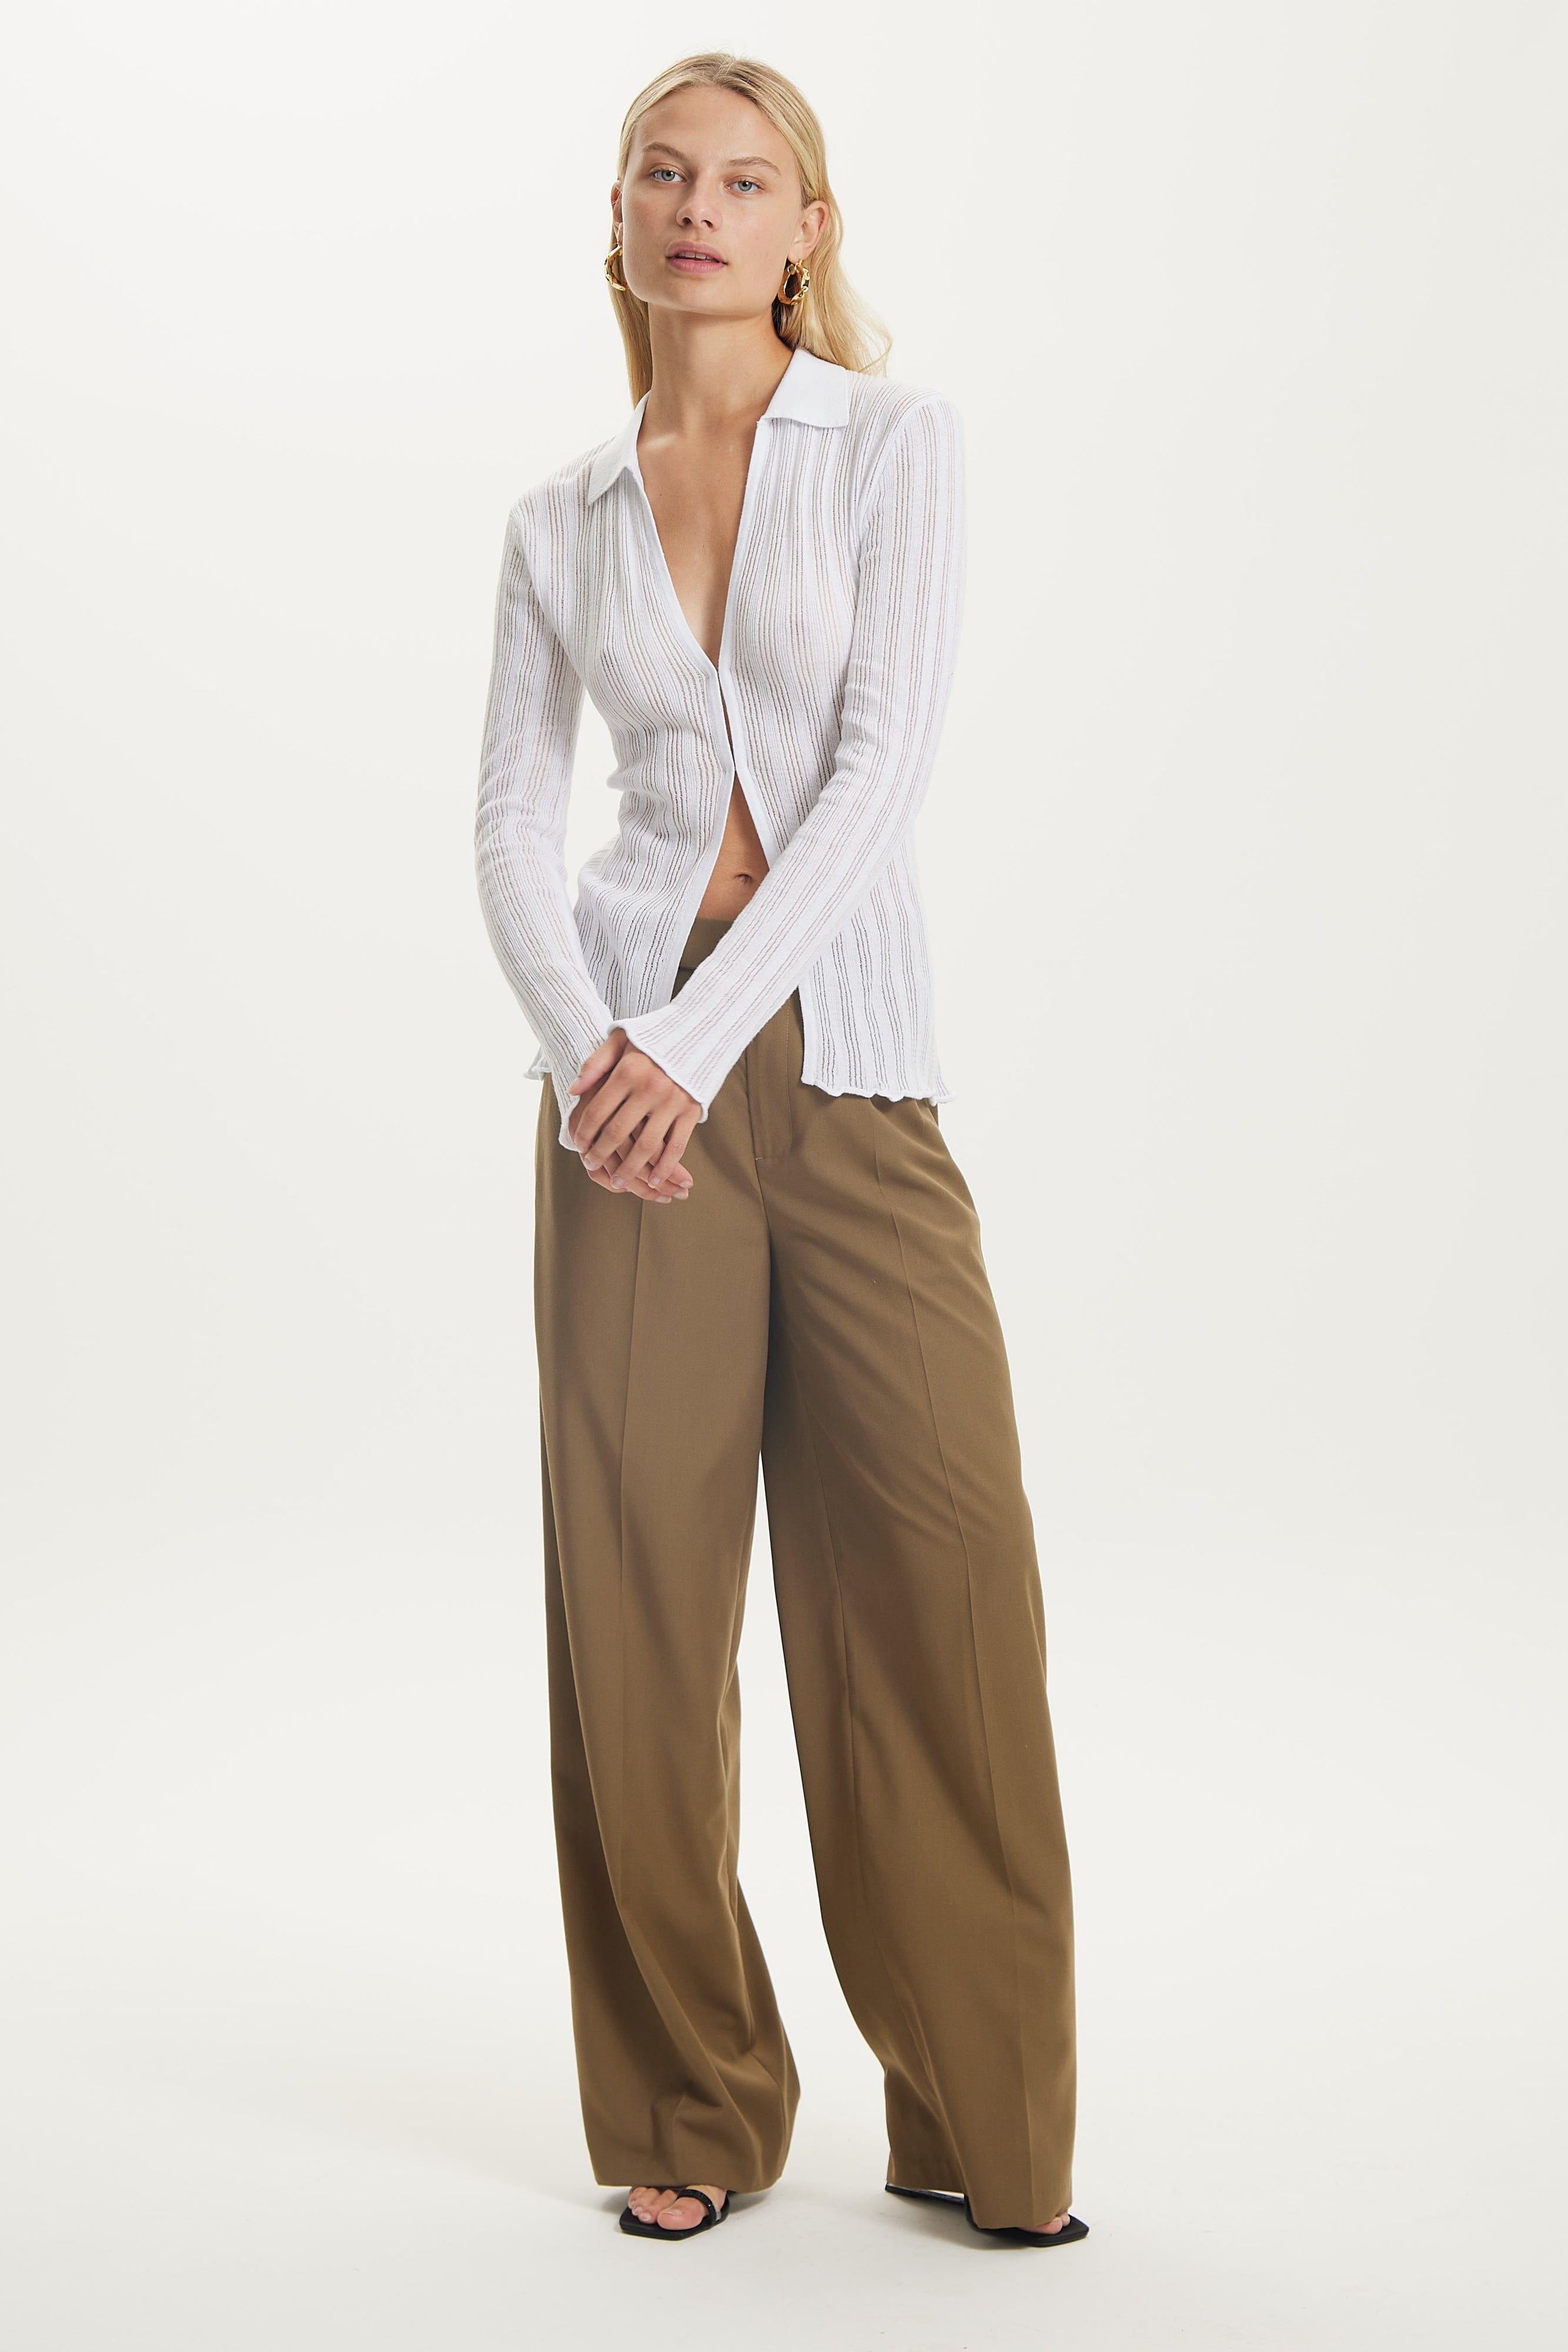 HOOKED IN KNIT FLARE PANT, ONYX, Third Form